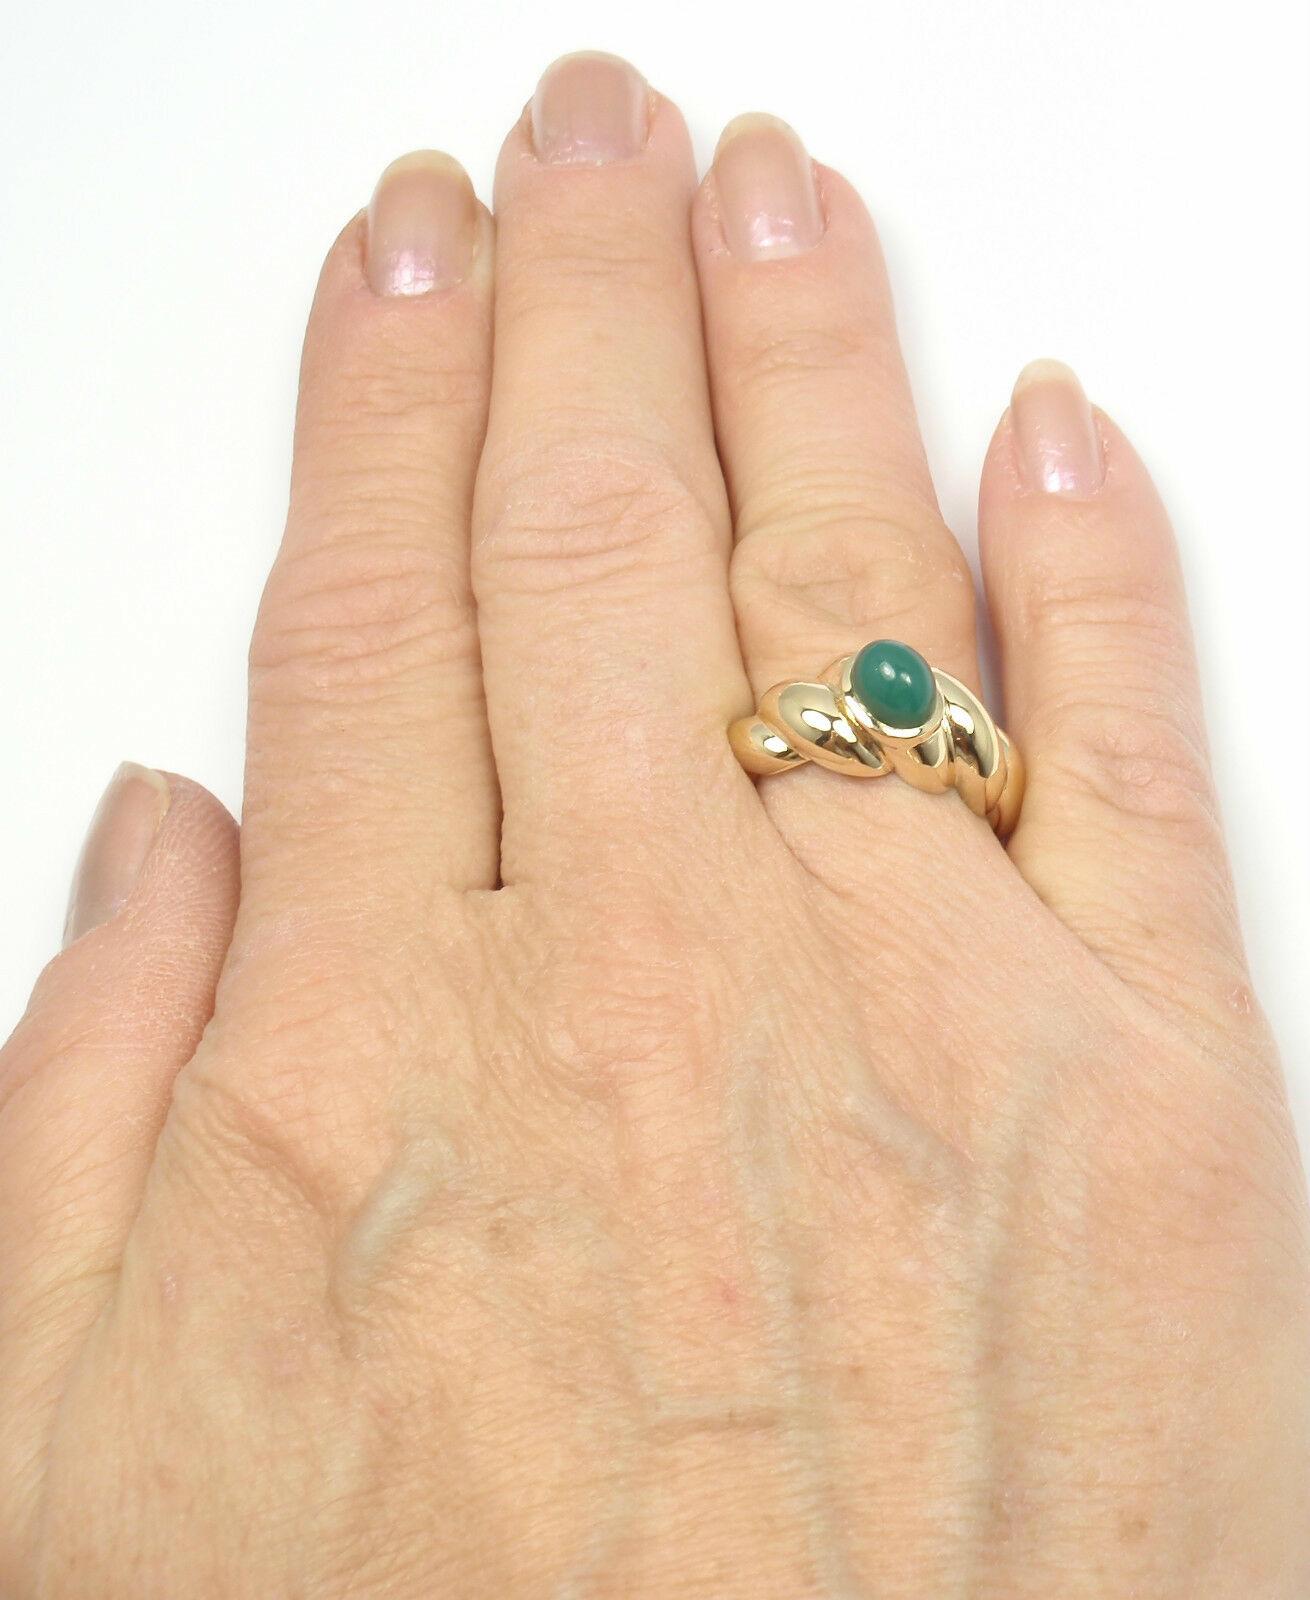 Van Cleef & Arpels Green Chalcedony Yellow Gold Band Ring In Excellent Condition For Sale In Holland, PA